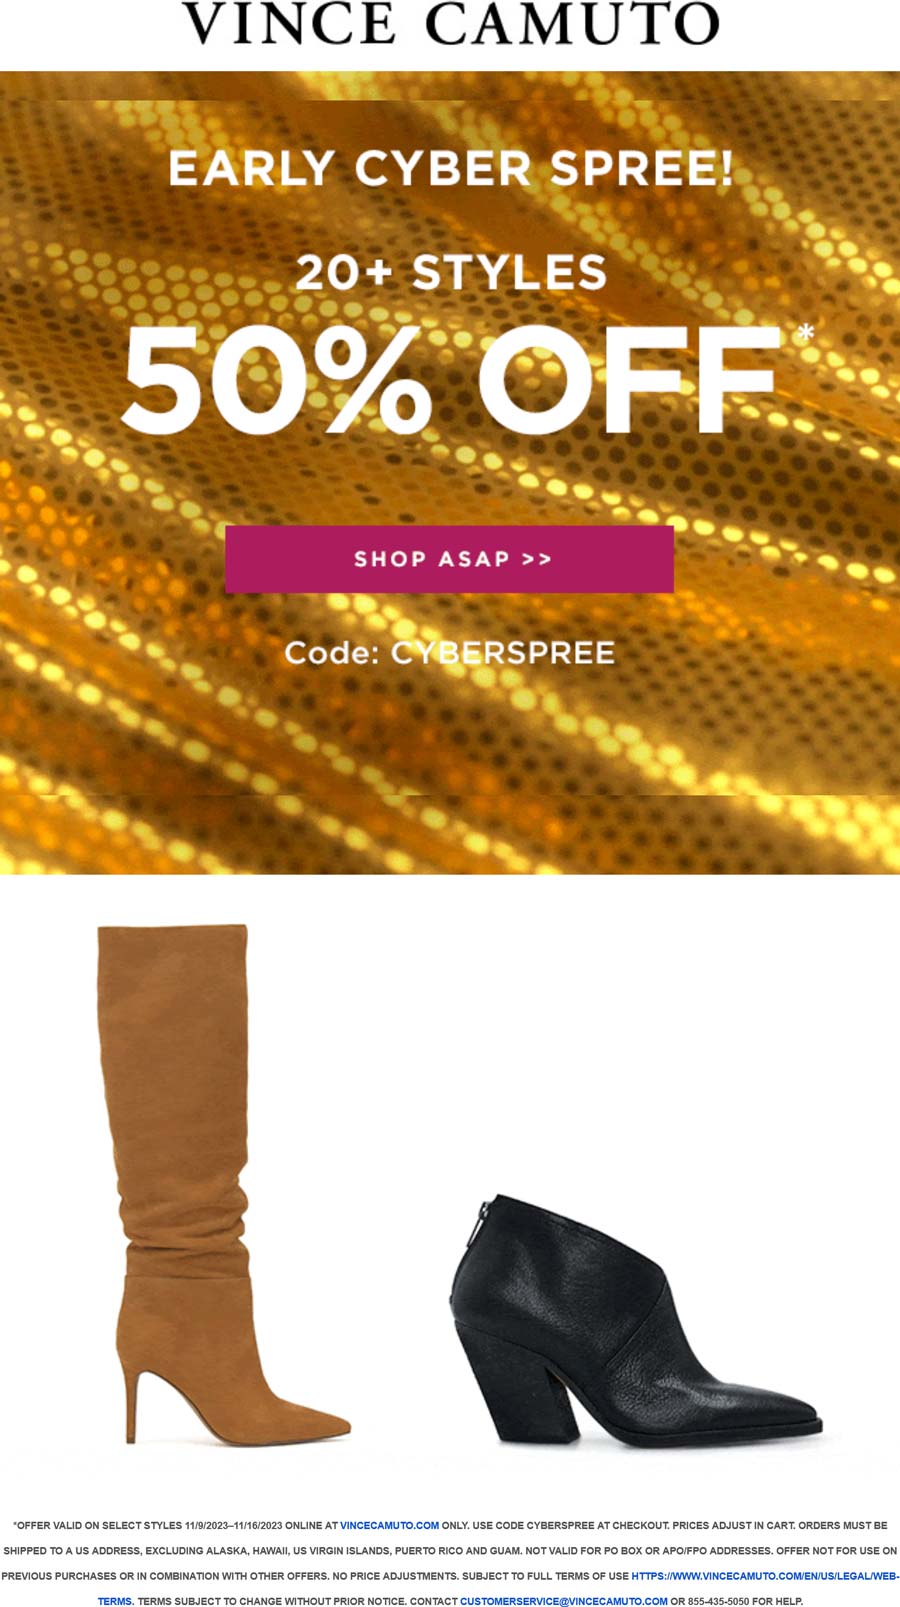 Vince Camuto stores Coupon  50% off various styles online at Vince Camuto via promo code CYBERSPREE #vincecamuto 